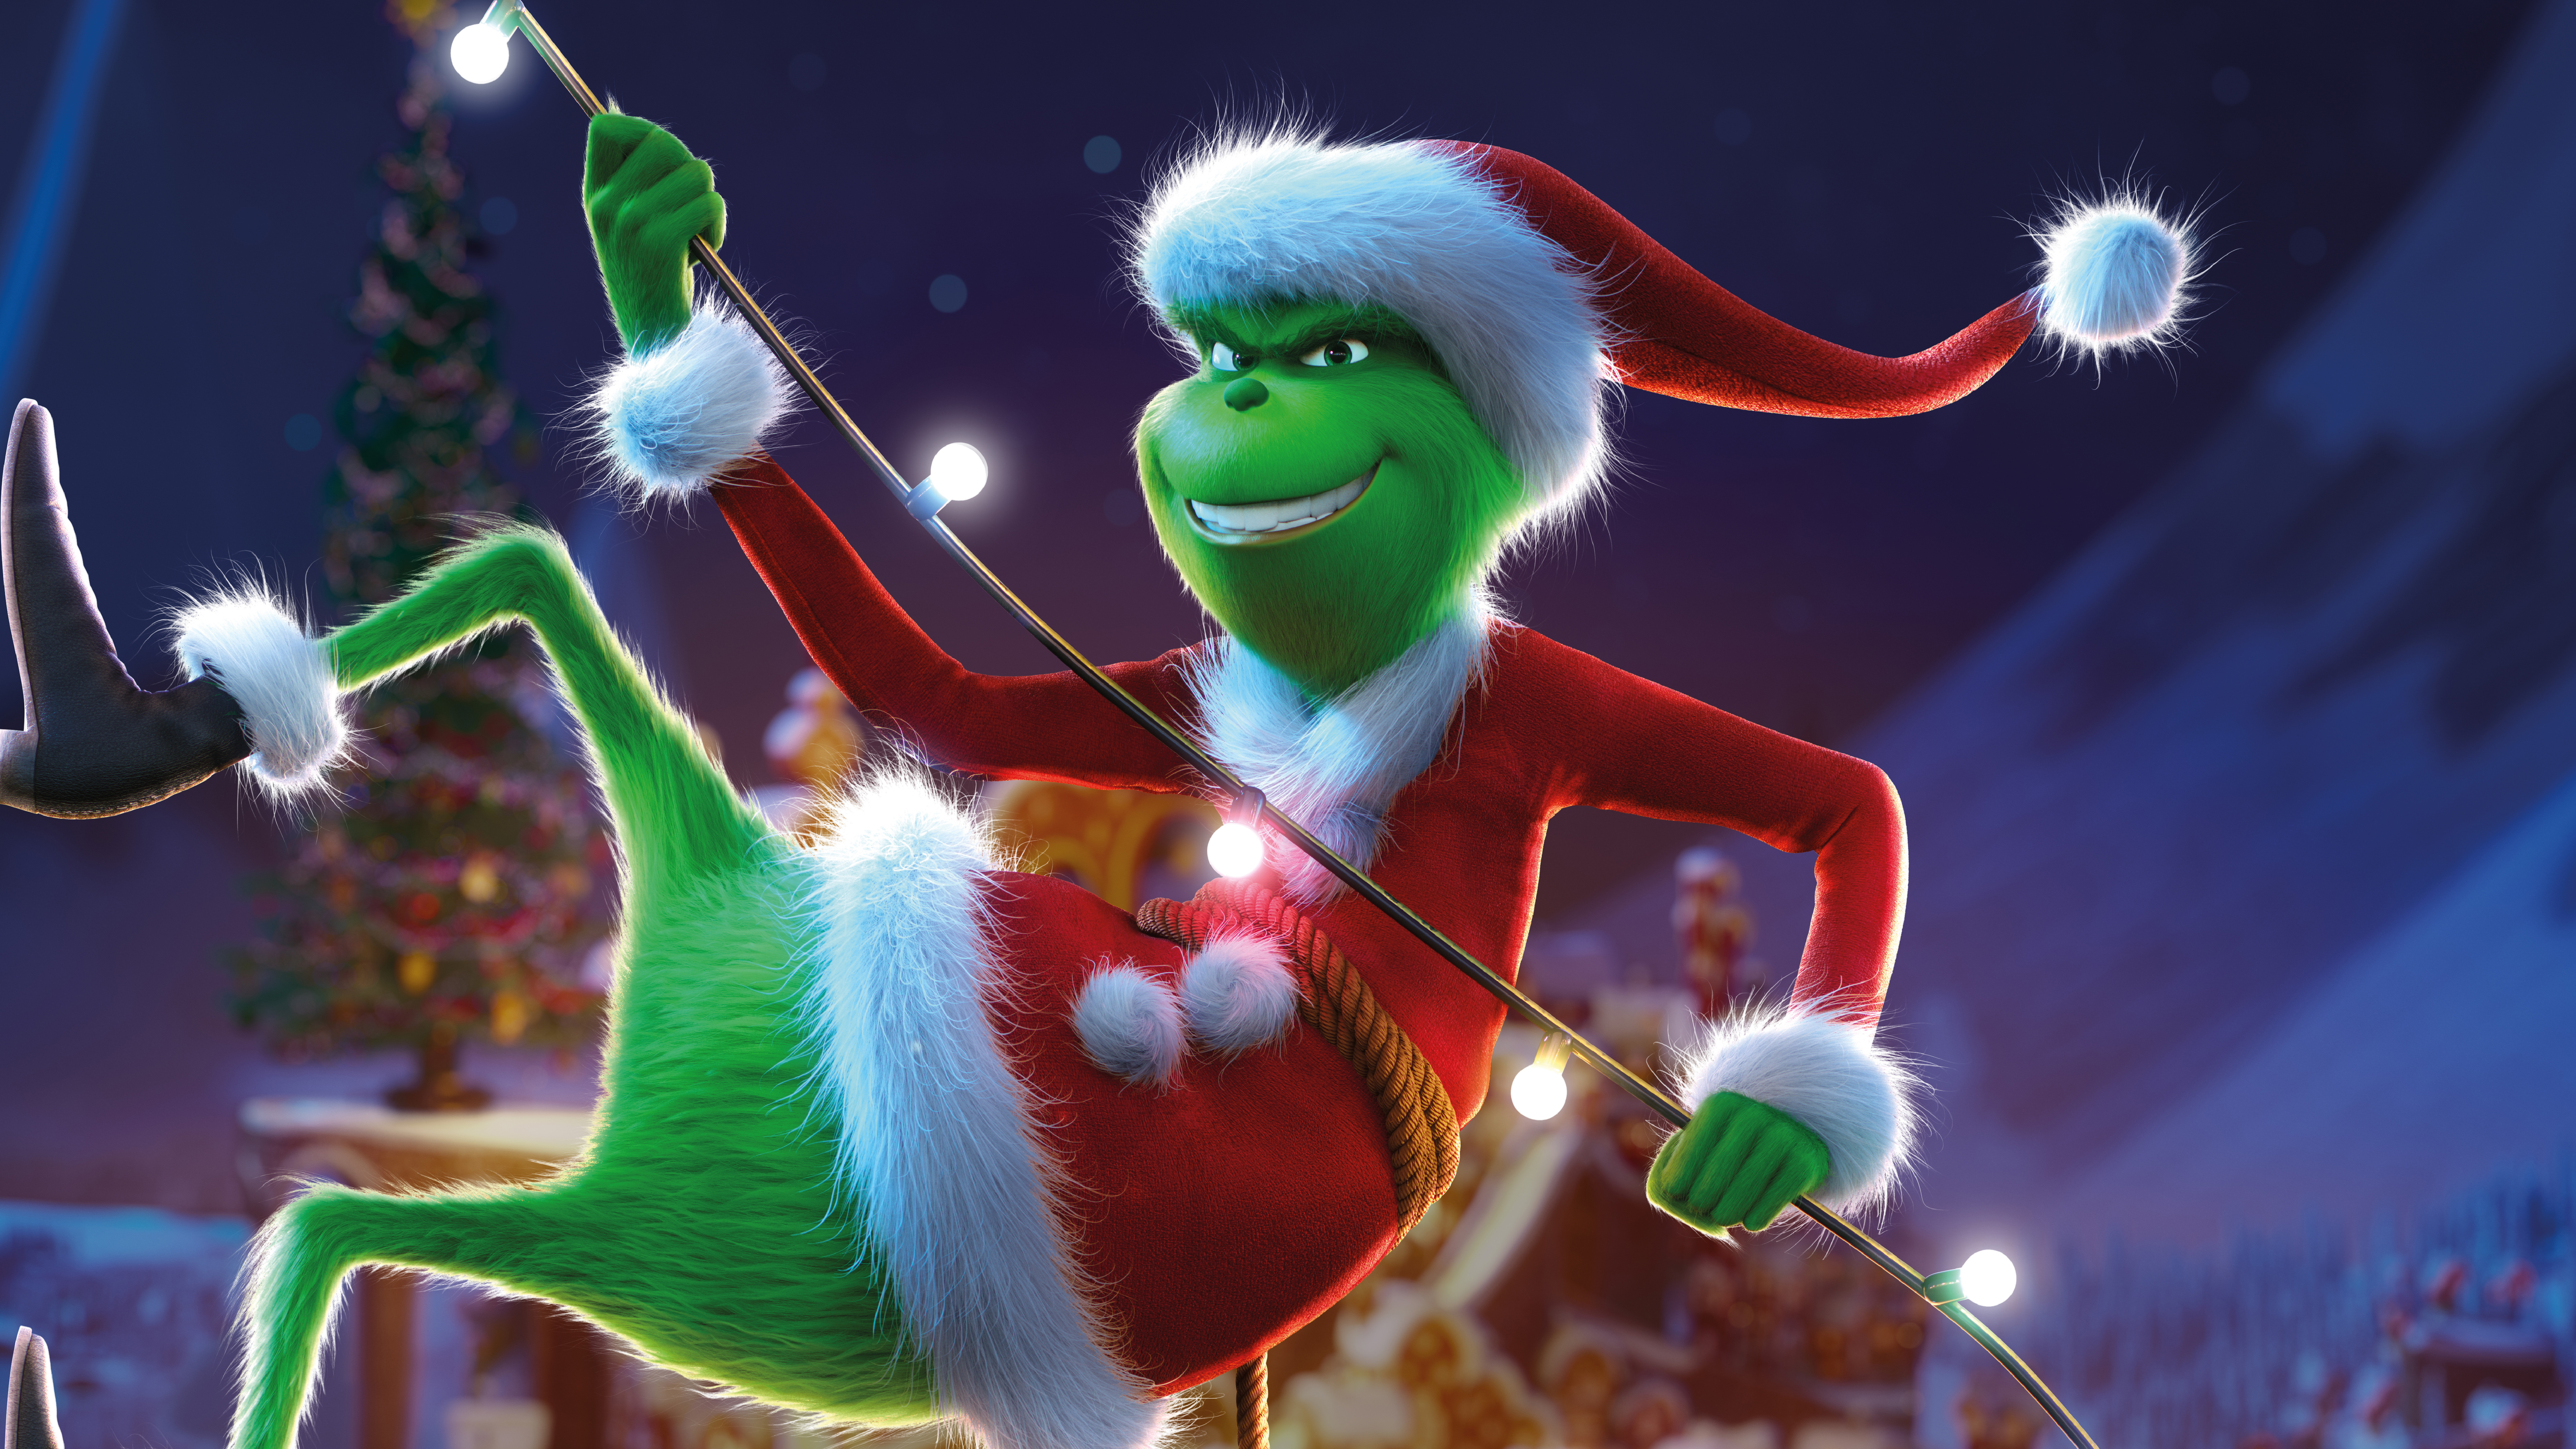 the grinch, 2018 movies, 8k, movies, hd, 4k, animated movies, 5k Gallery HD Wallpaper